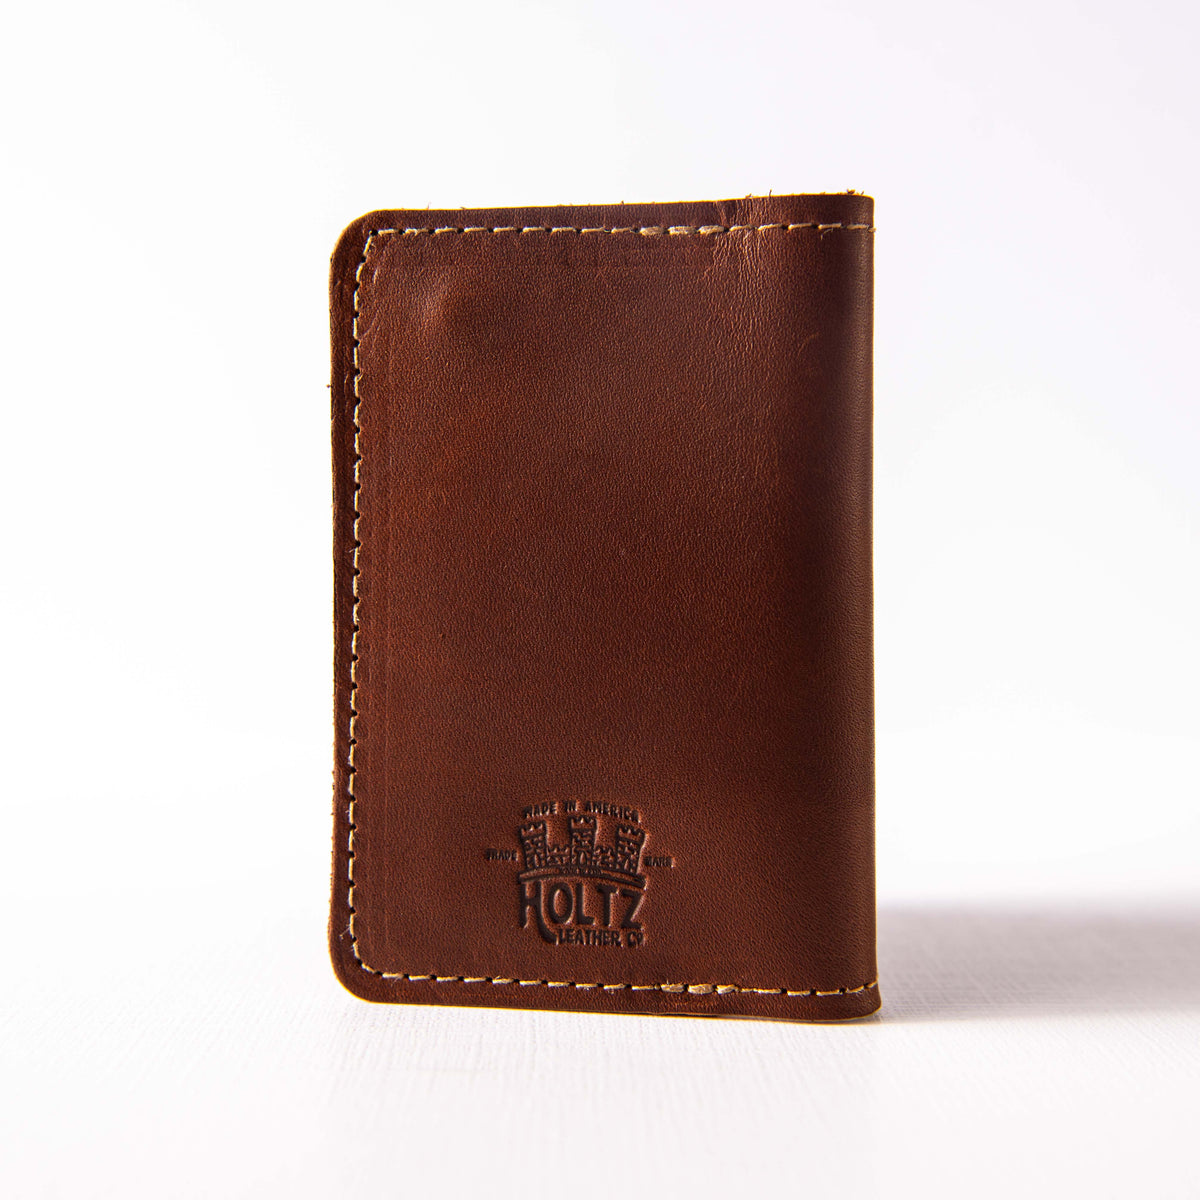 Personalized Business Card Holder Leather Bifold Credit Card 